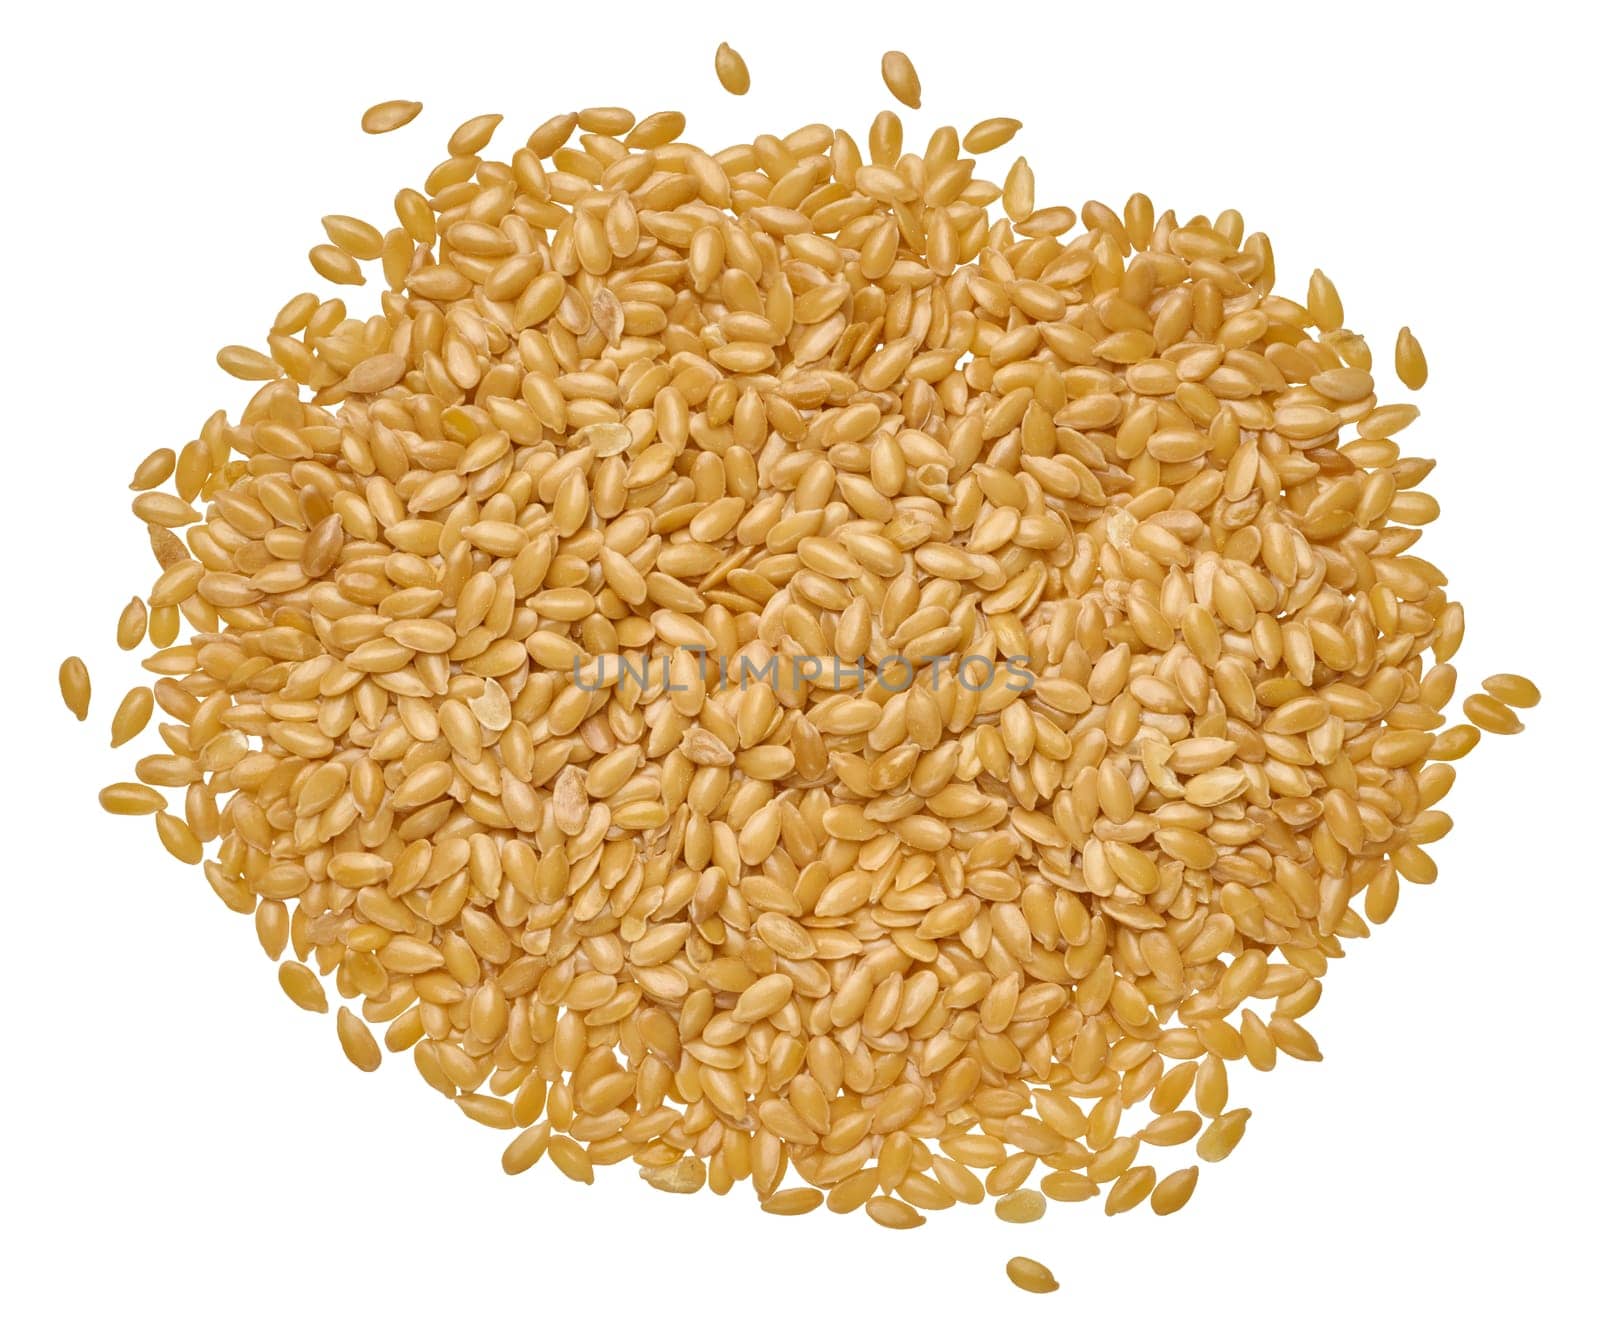 Heap of flax seeds on isolated background, top view